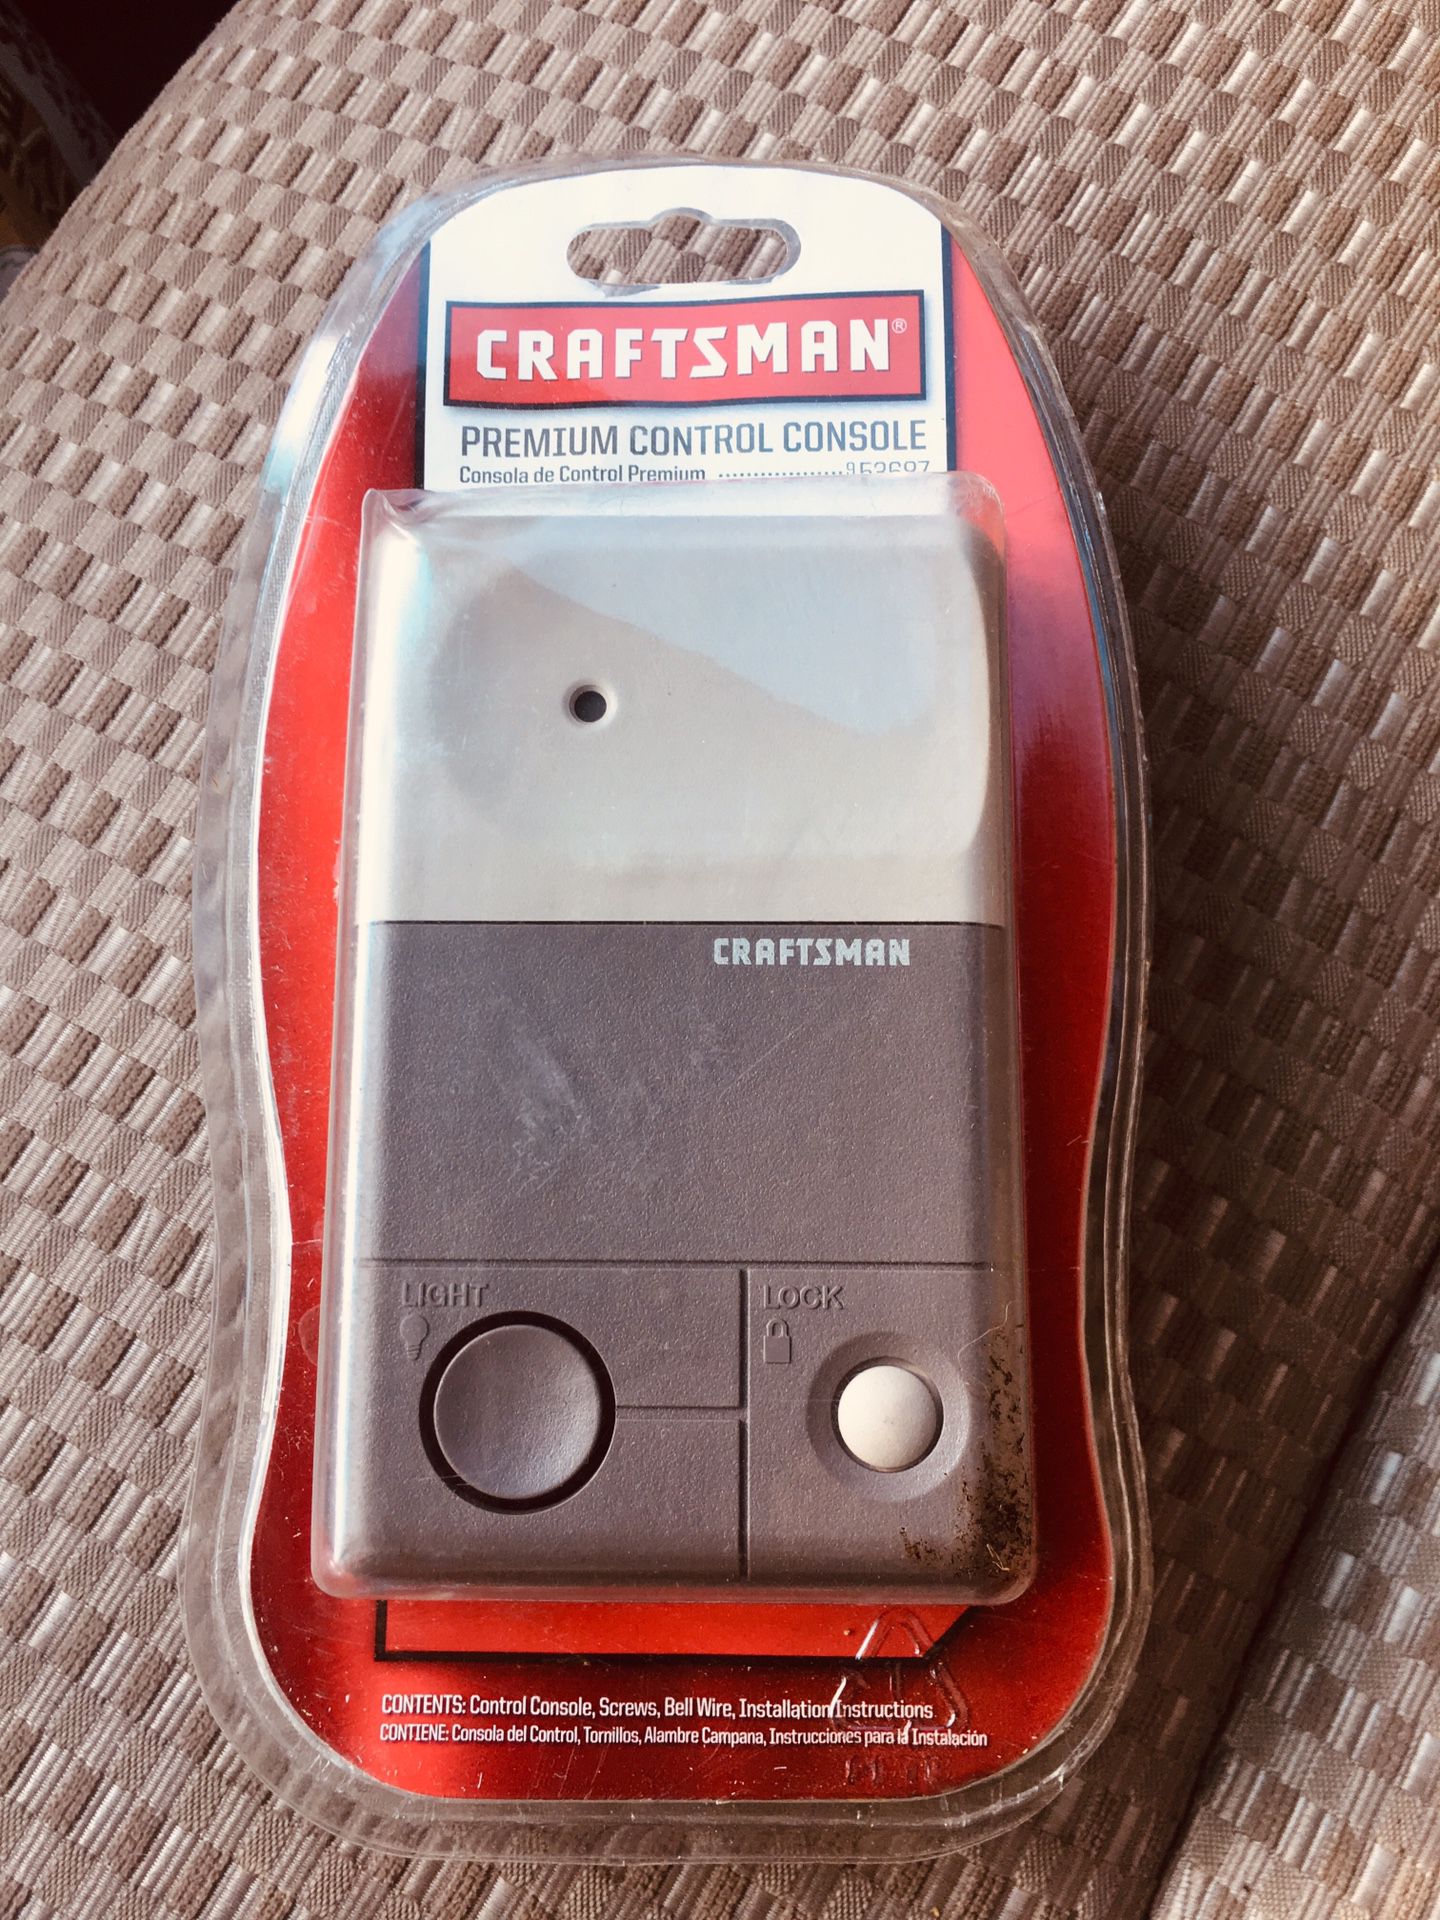 Craftsman Wall-Mounted Premium Control Console